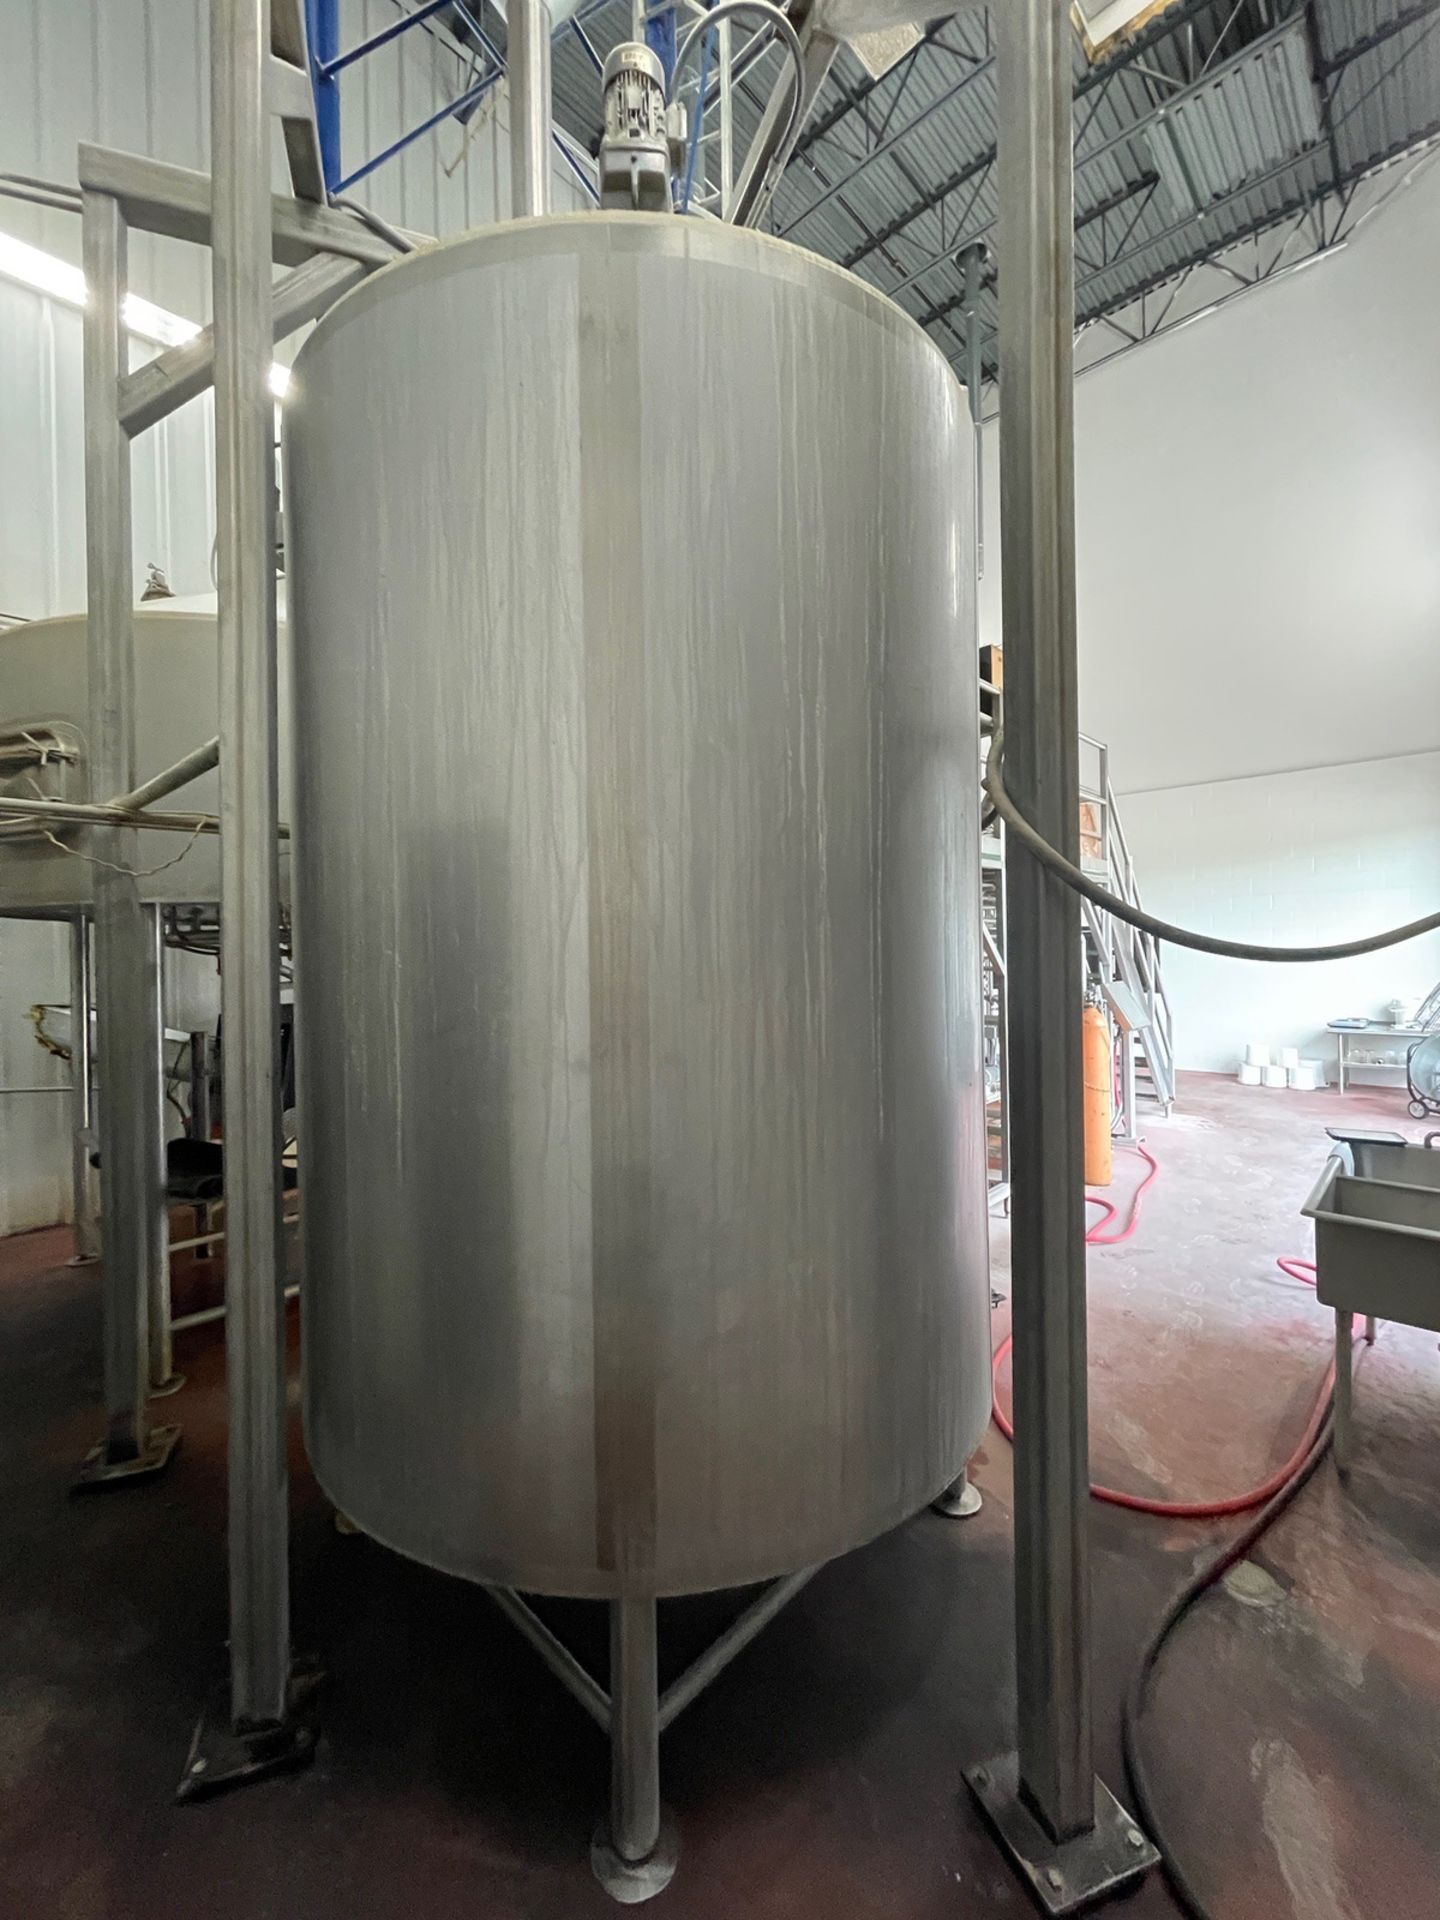 2012 Sprinkman 30 BBL 5-Vessel Brewhouse, with Grain Mash Tun (33 BBLS, Approx. 6.5 | Rig Fee $16000 - Image 5 of 108